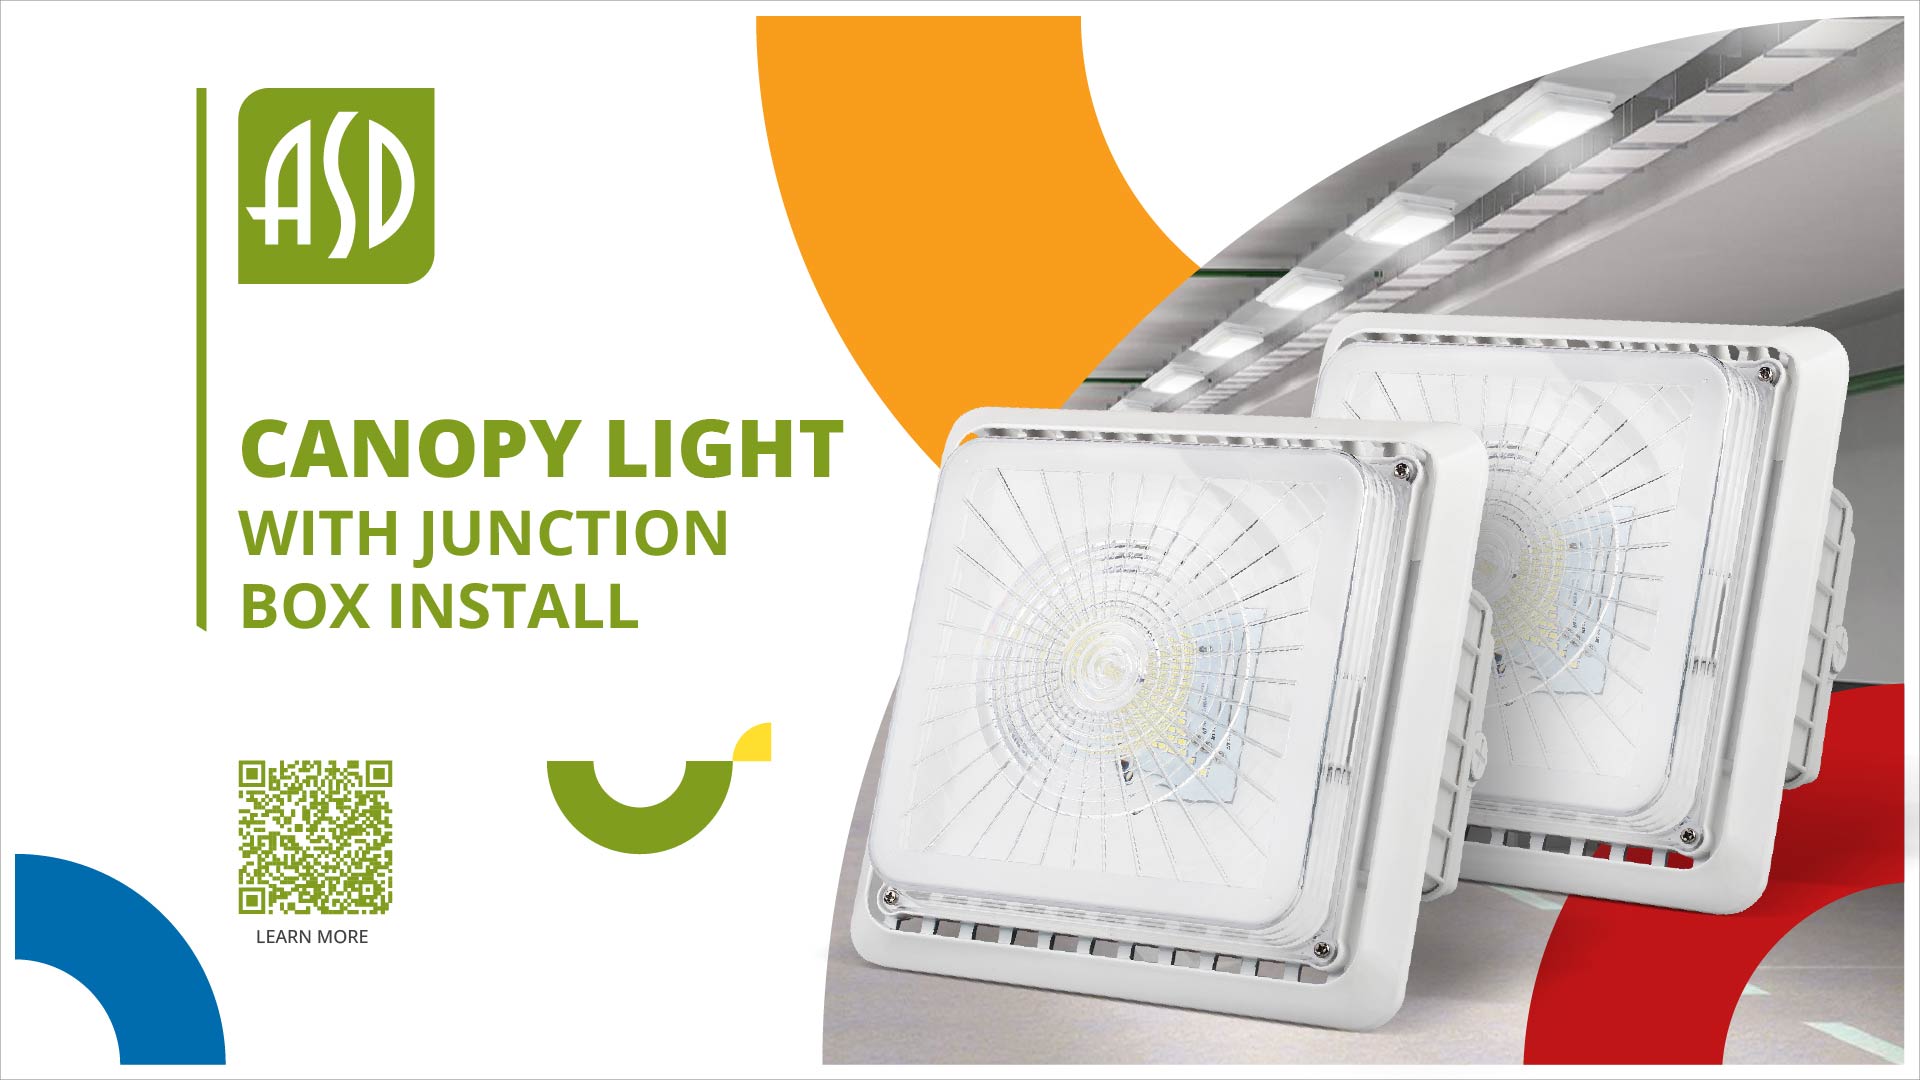 ASD CANOPY LIGHT with Junction Box Install